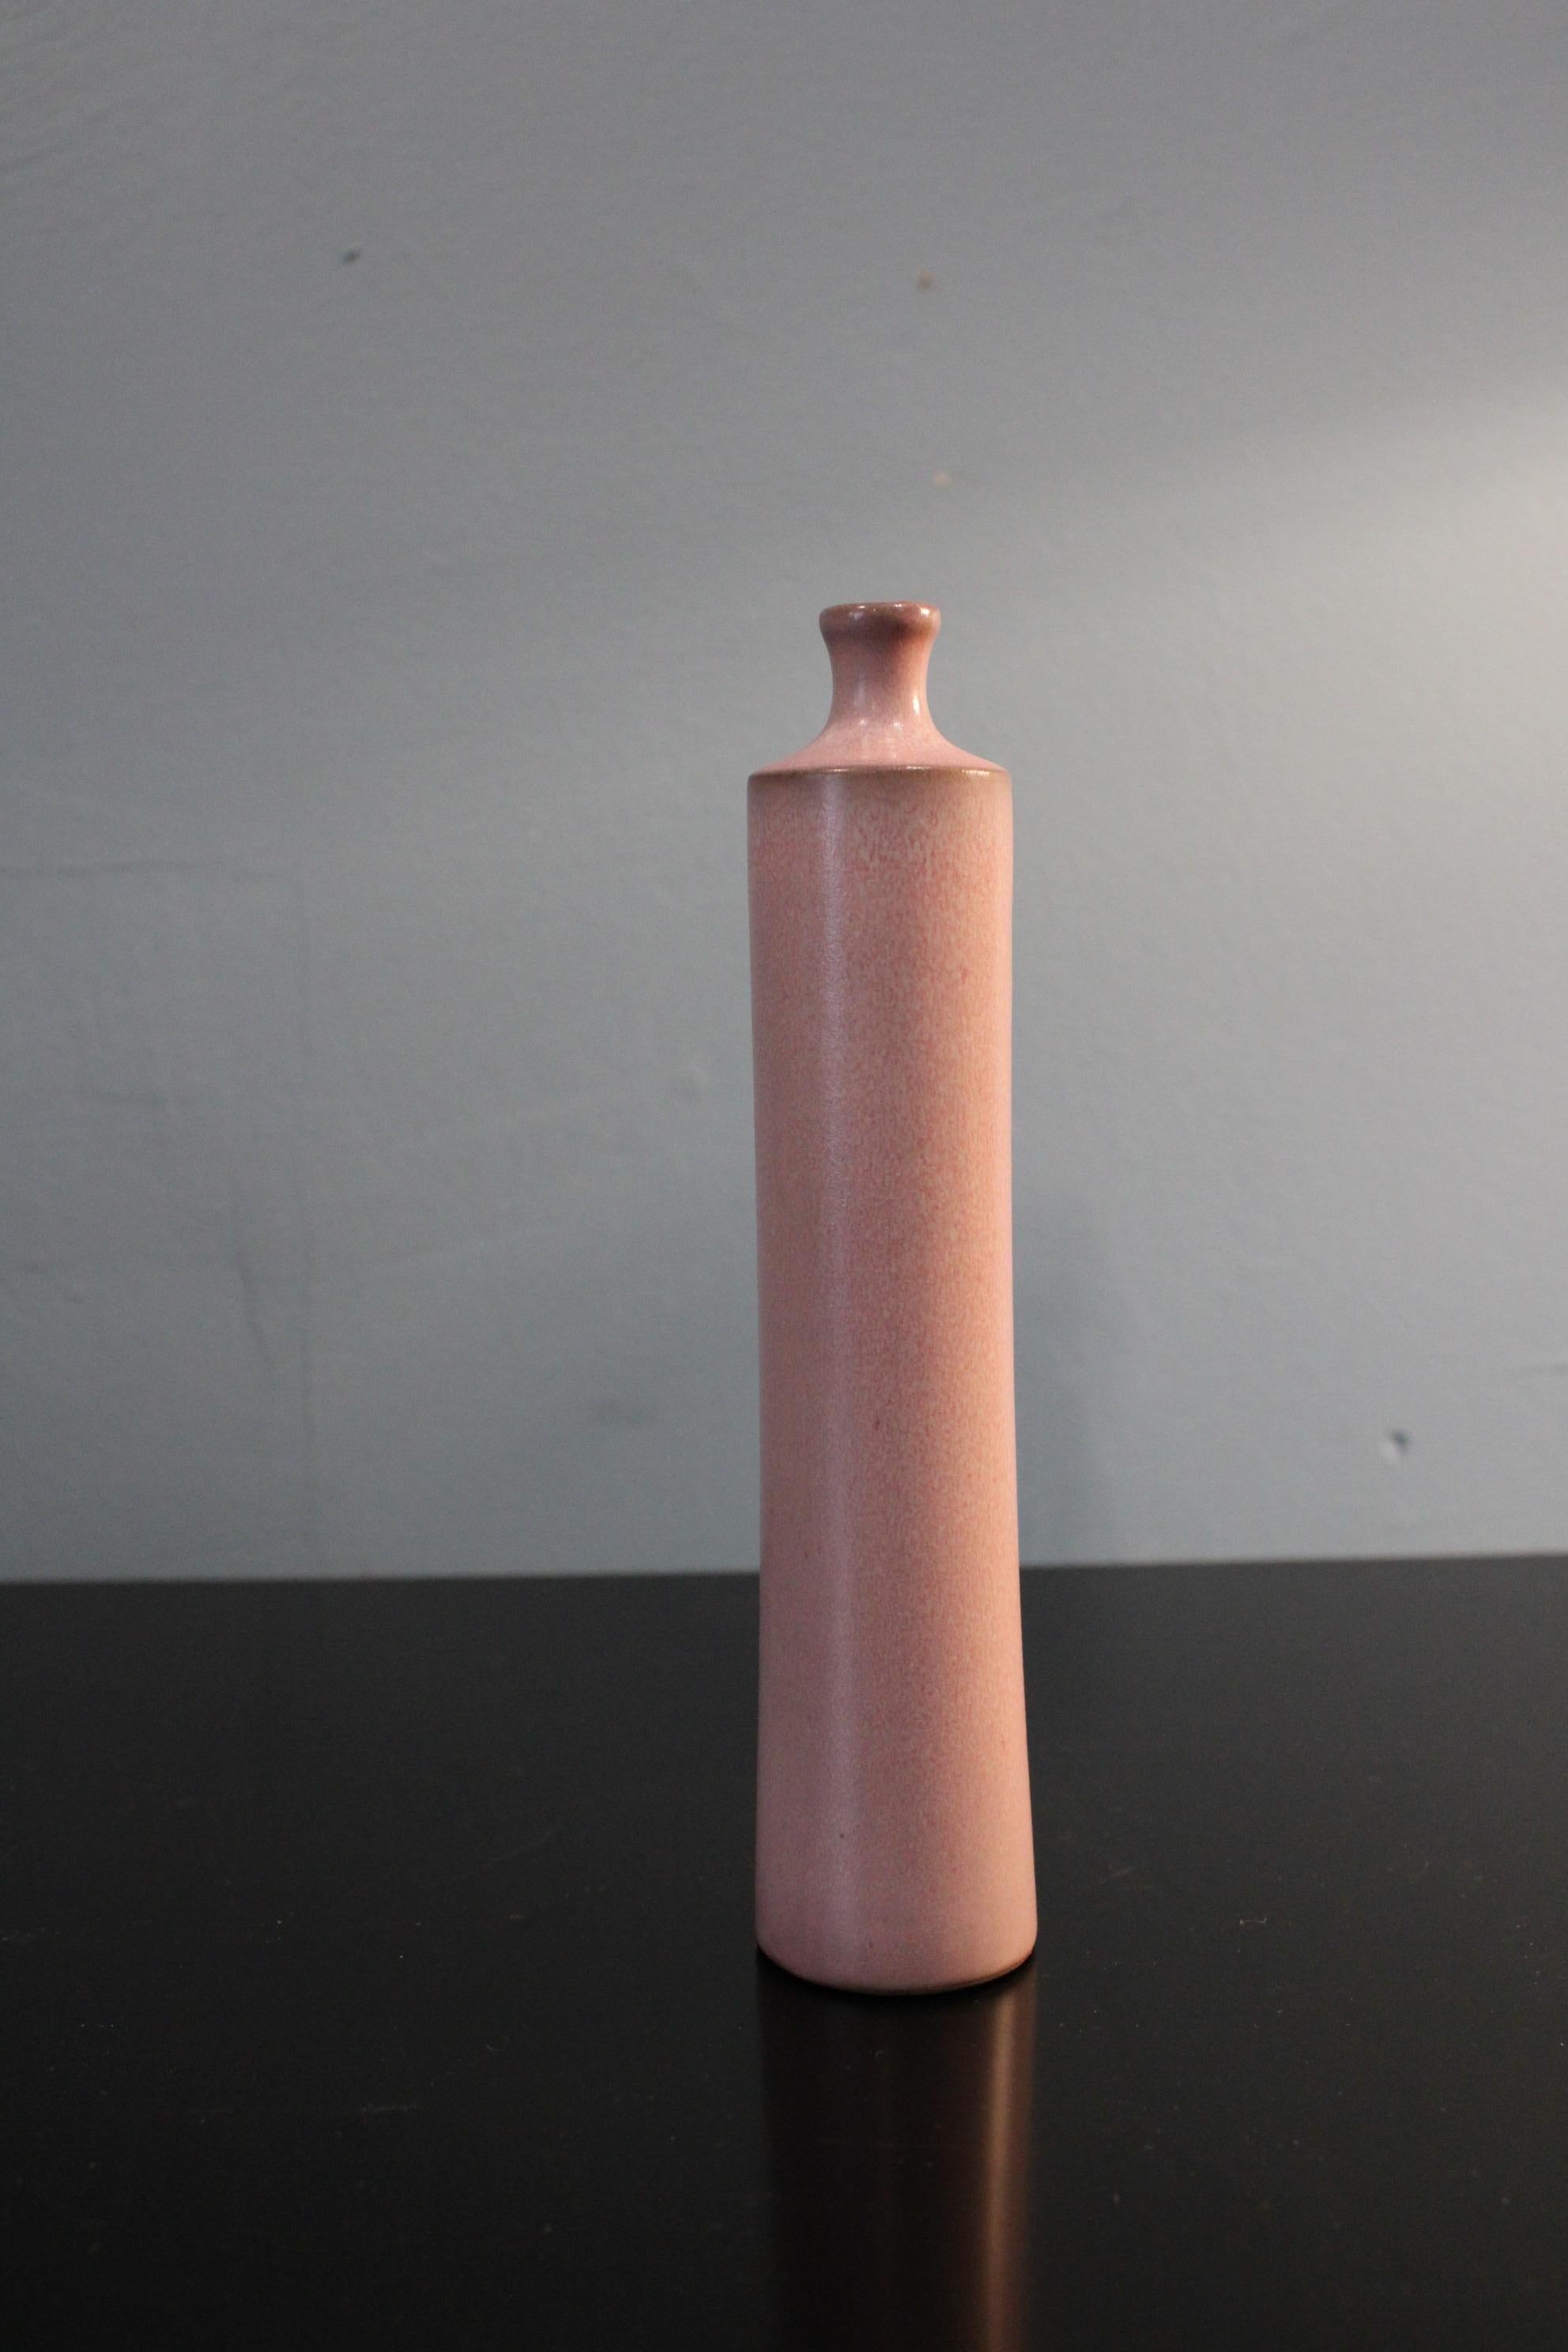 Bottle ceramic by Jacques (1926-2088) and Dani Ruelland (1933-2010).
Pink color.
Signed Ruelland under the base.
Circa 1960, France.